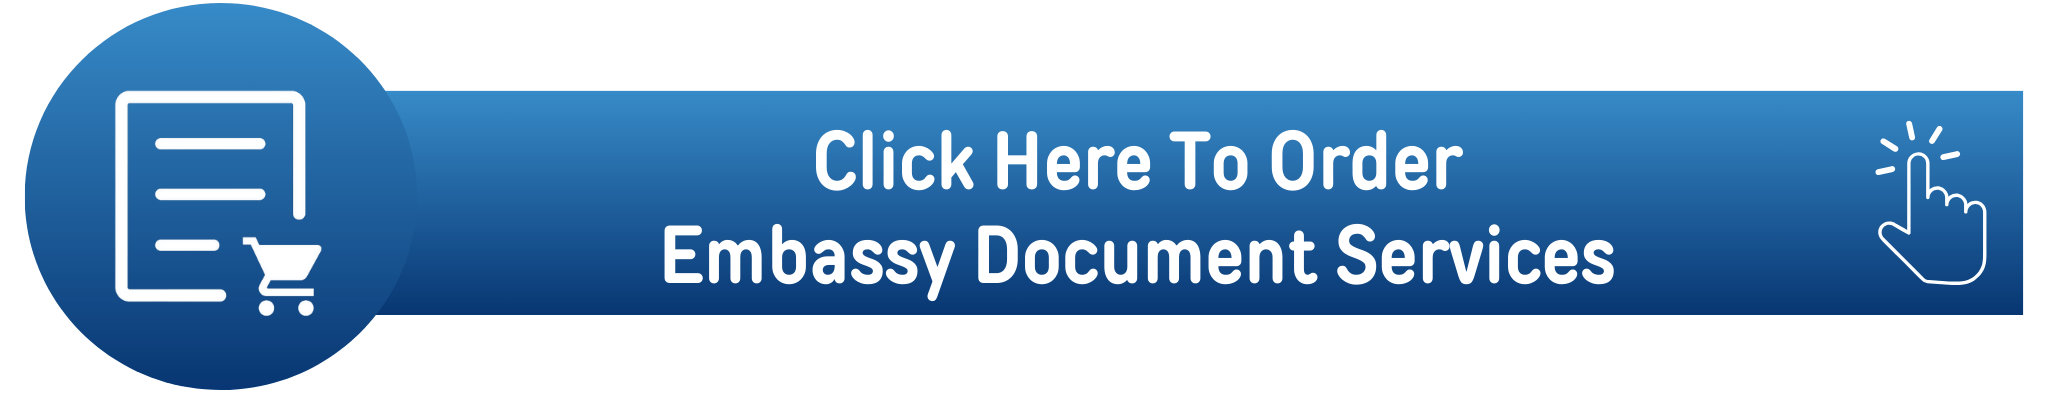 Click Here To Order Embassy Document Service